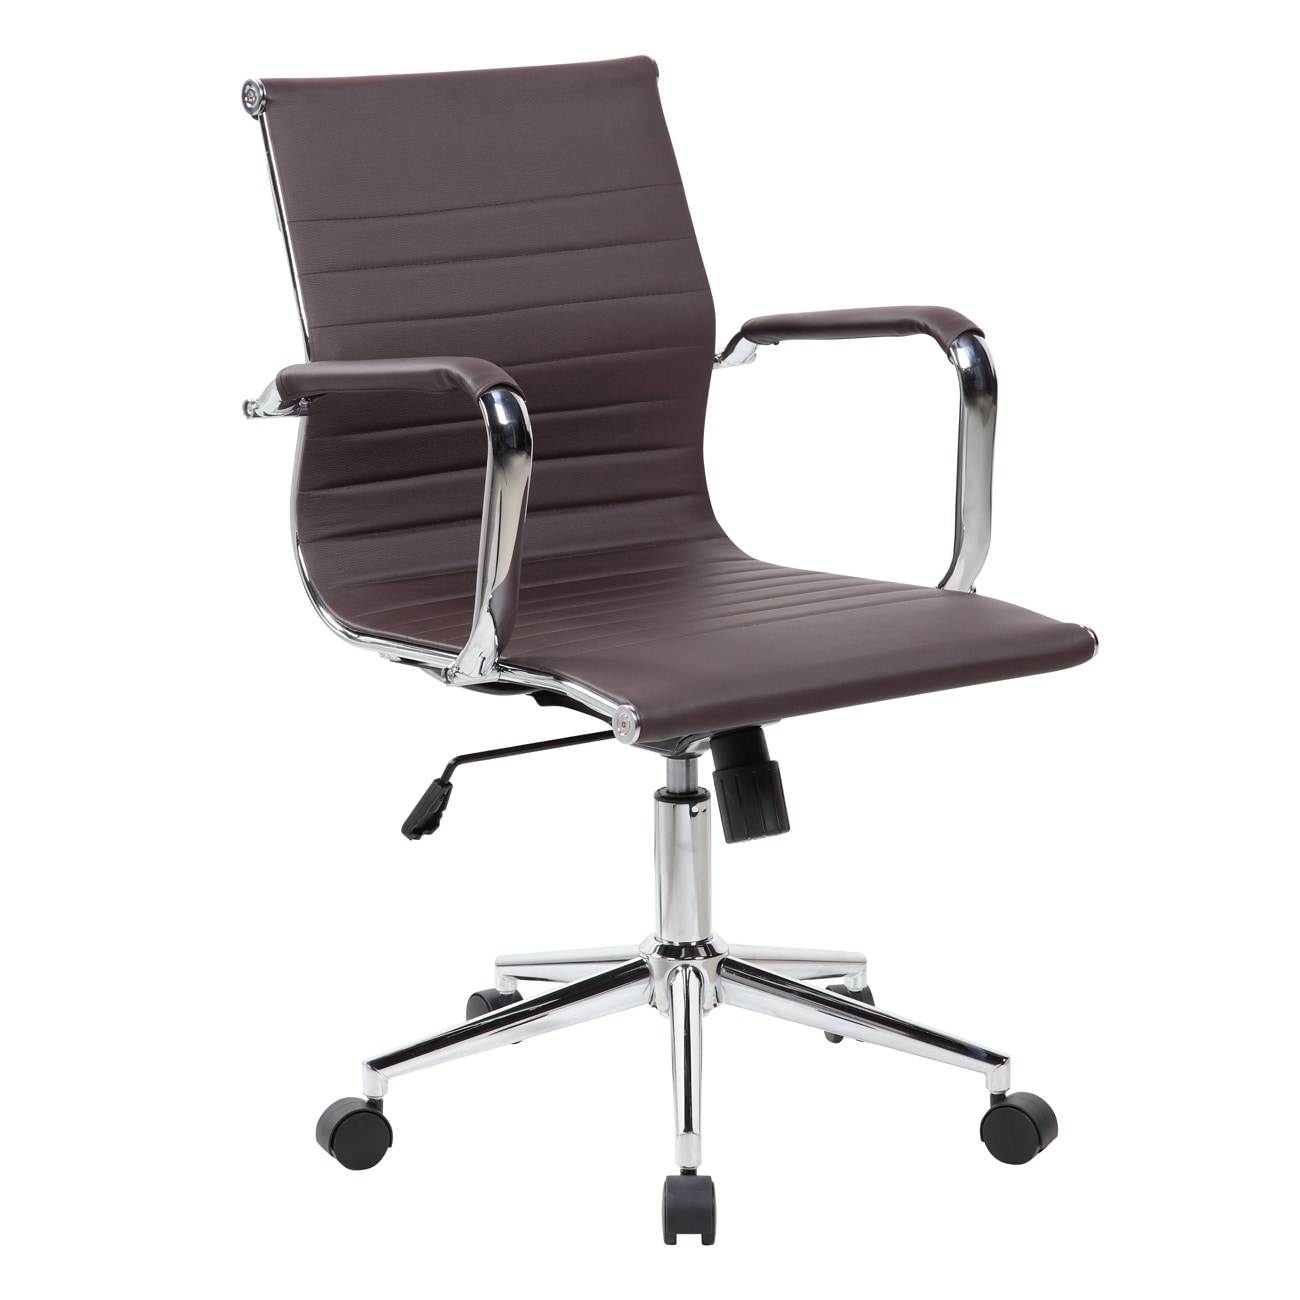 Elegant and Modern Ribbed Design Built-in Lumbar Support Executive Office Chair with Pneumatic Seat Height Adjustment